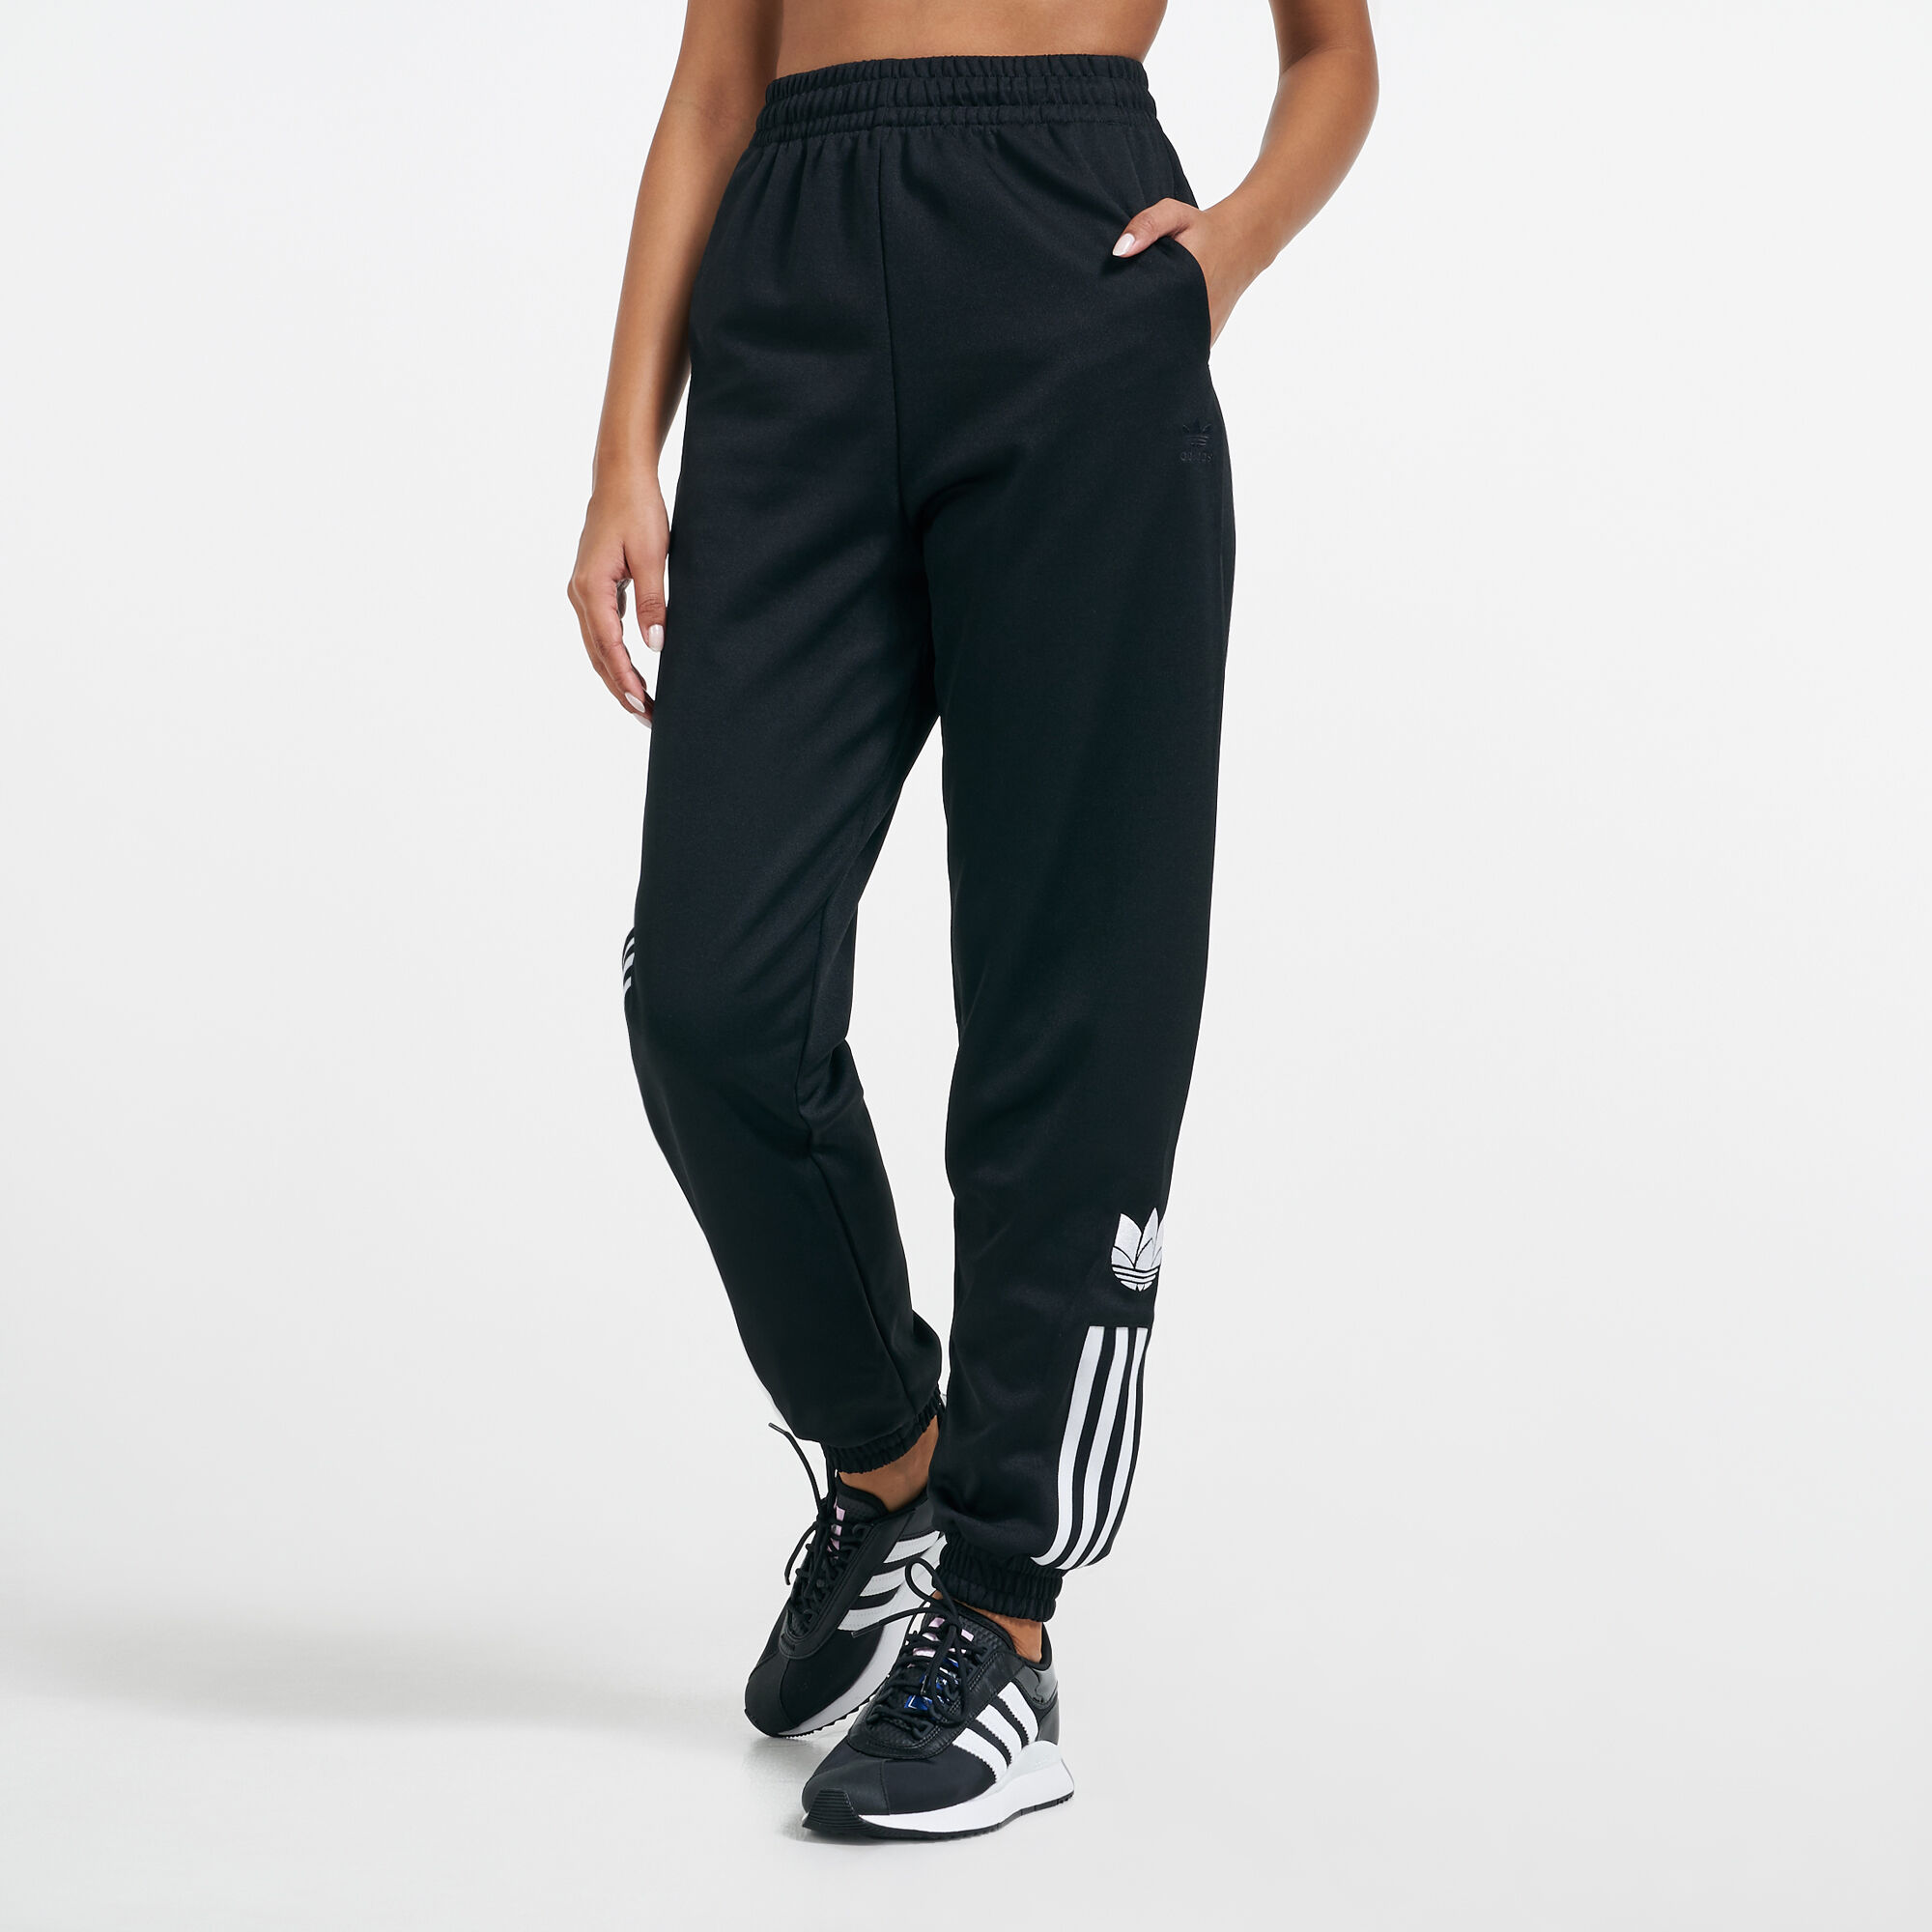 Adidas Womens Small Track Pants Superstar Black Trefoil Joggers Zip Ankle